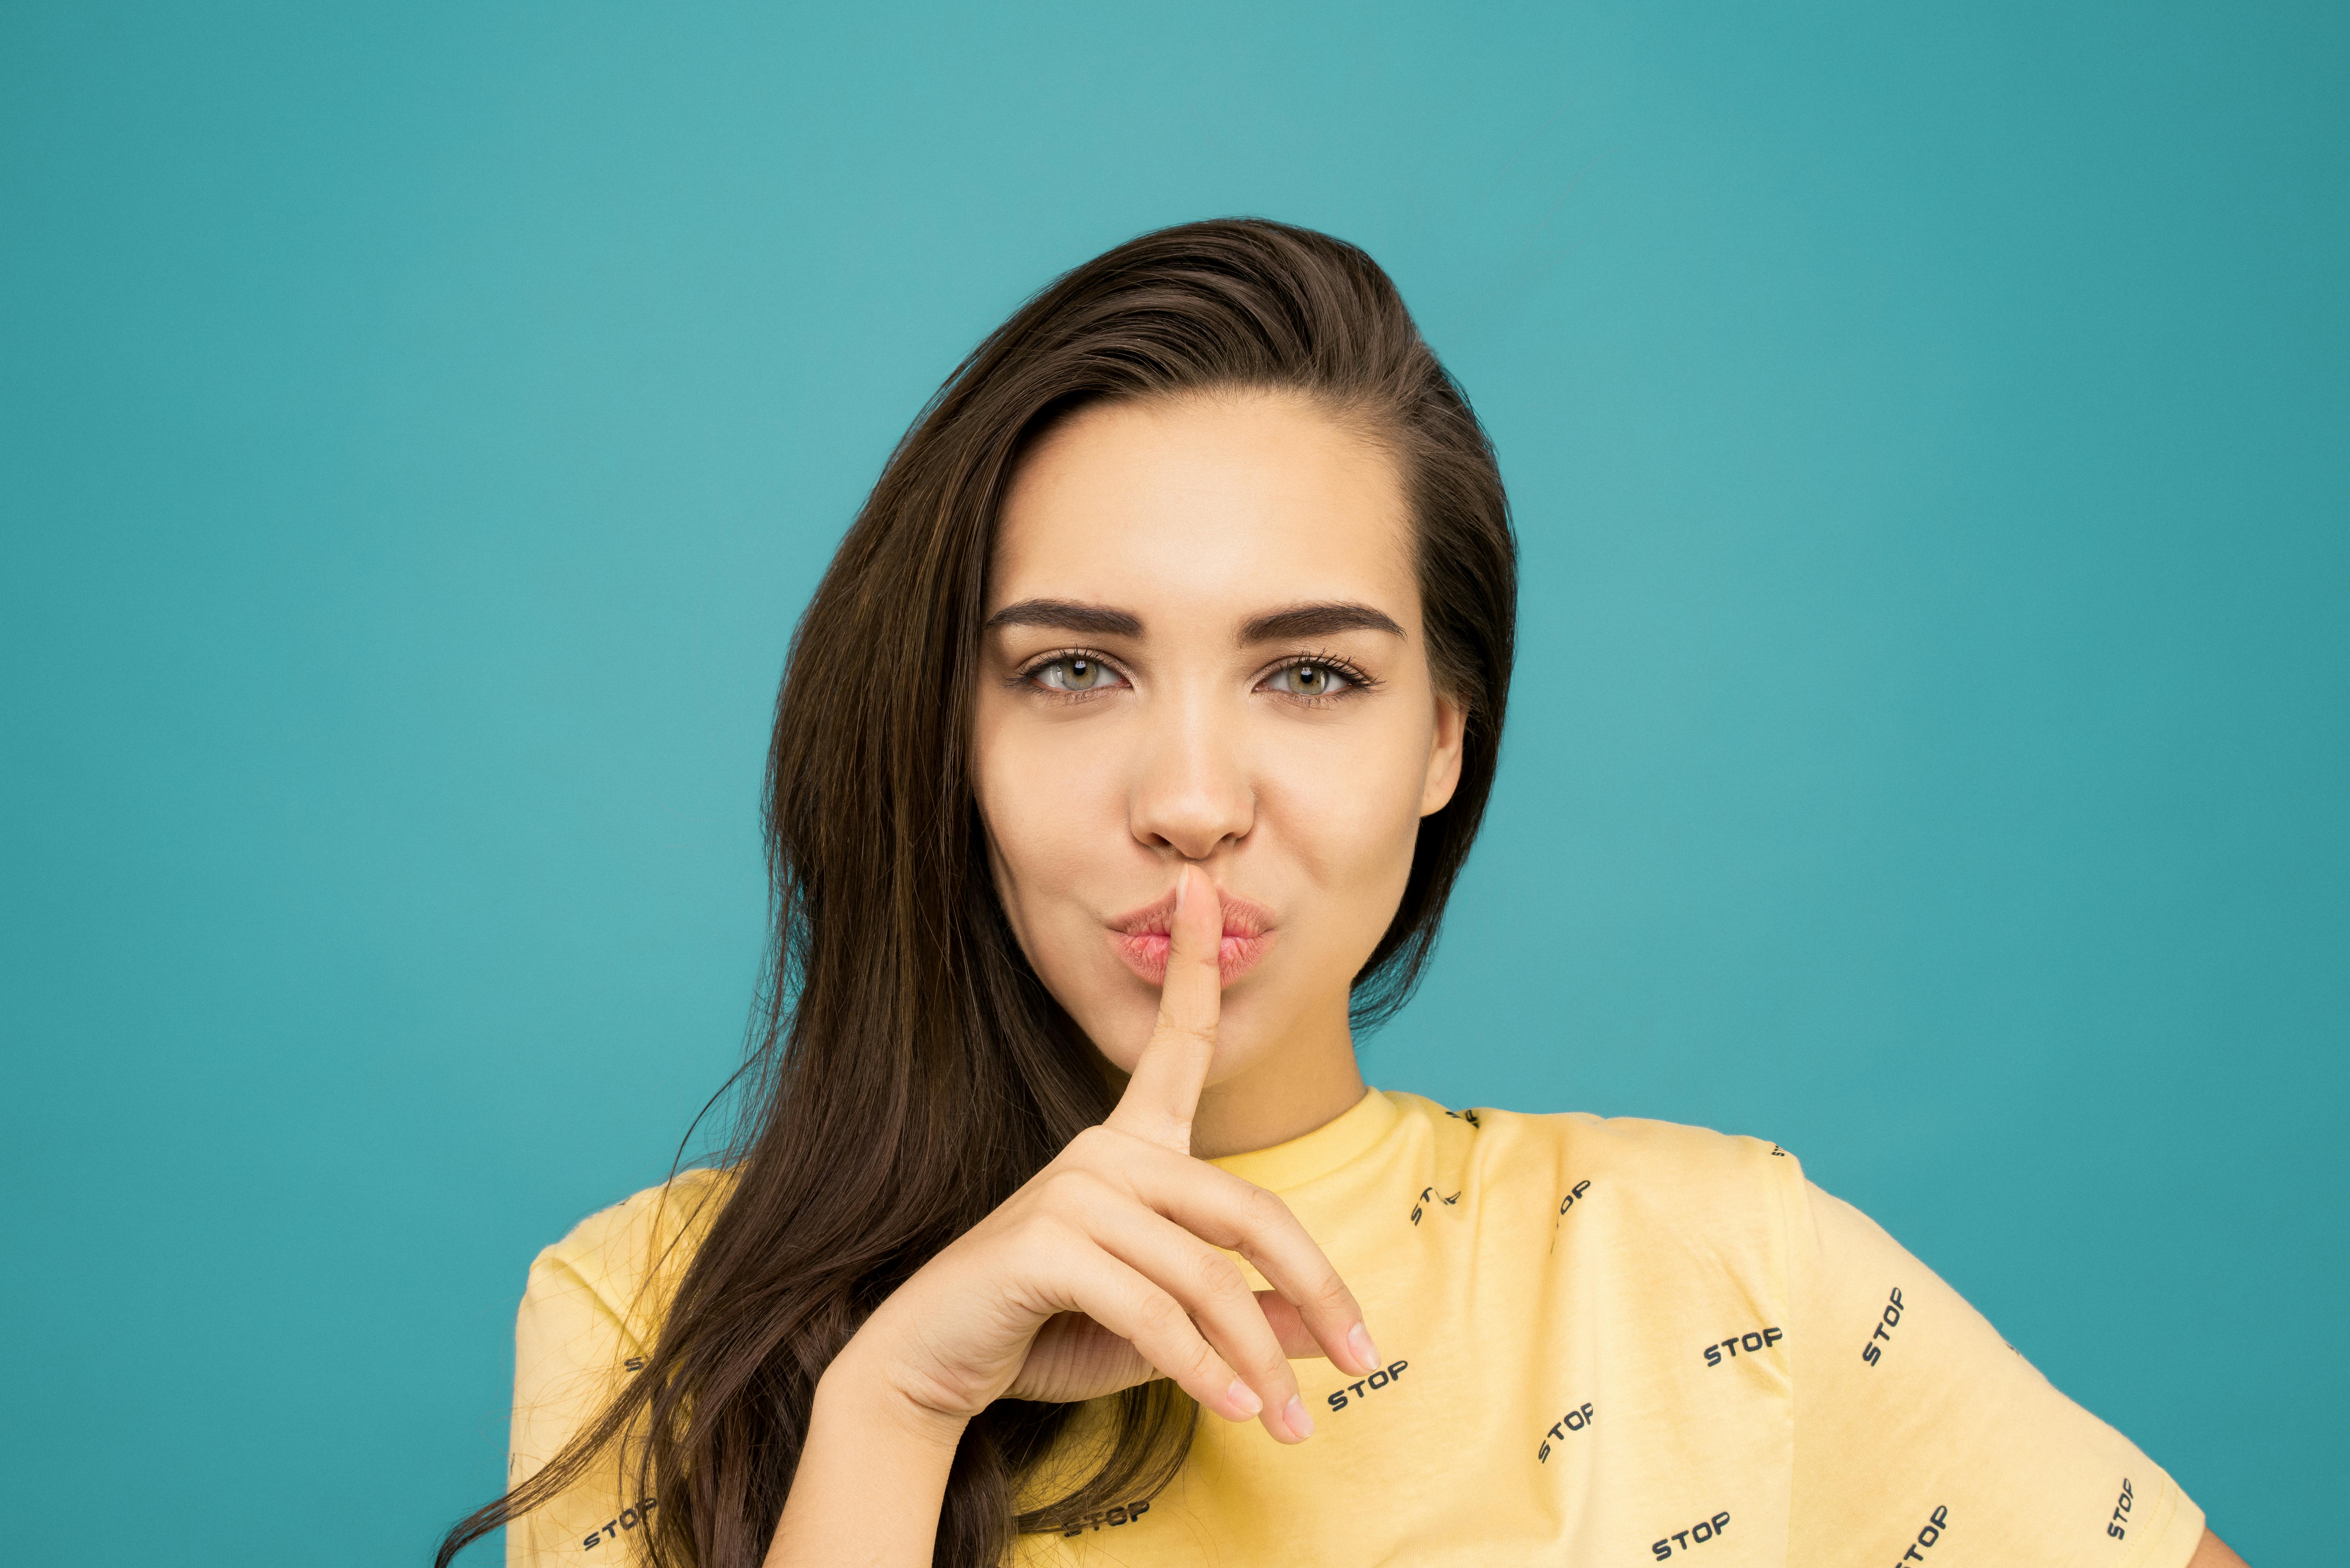 A woman with her finger to her mouth | Source: Pexels